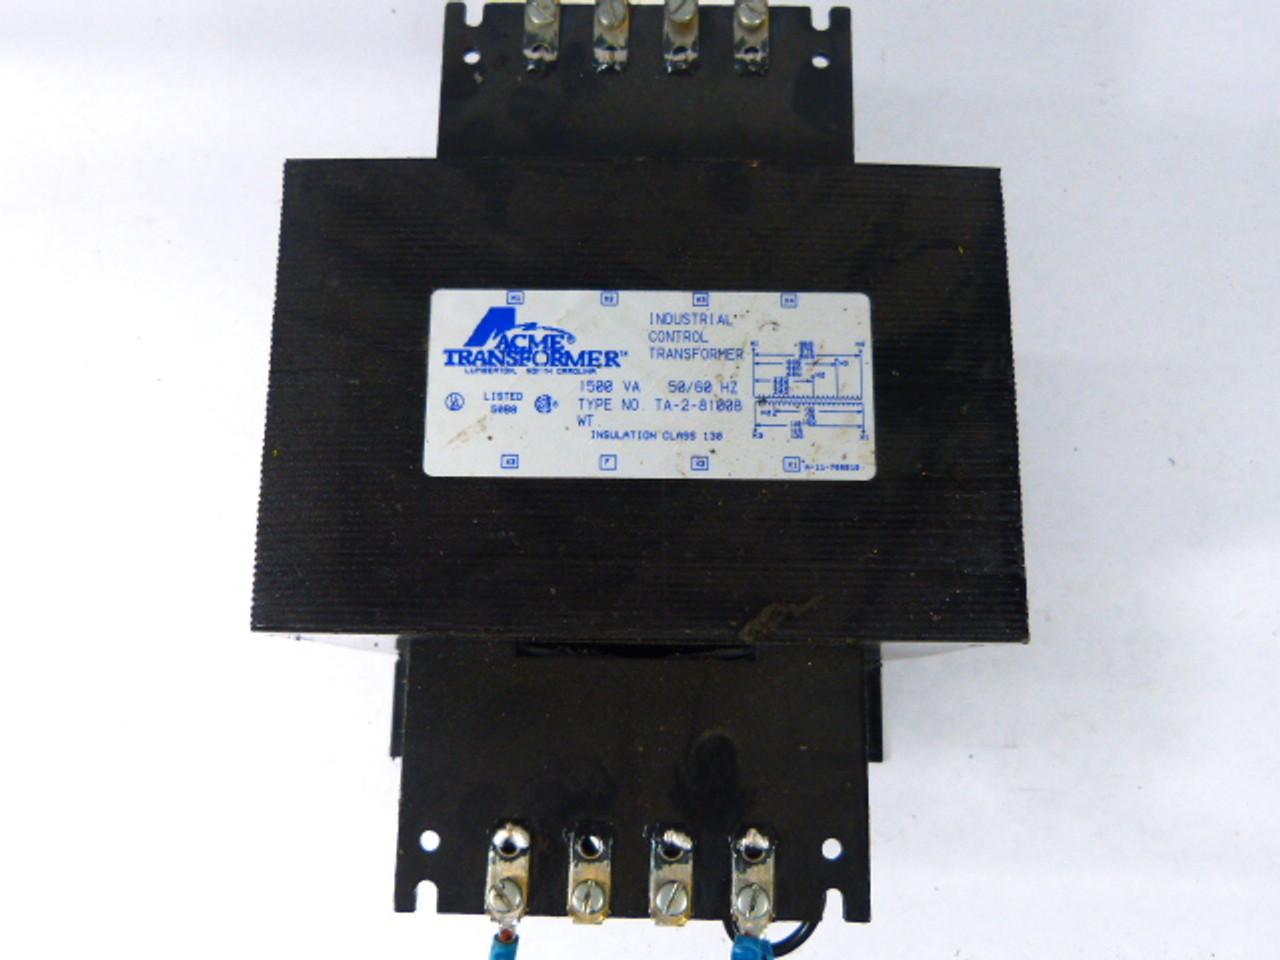 Aceme TA-2-81008 Industrial Control Transformer USED